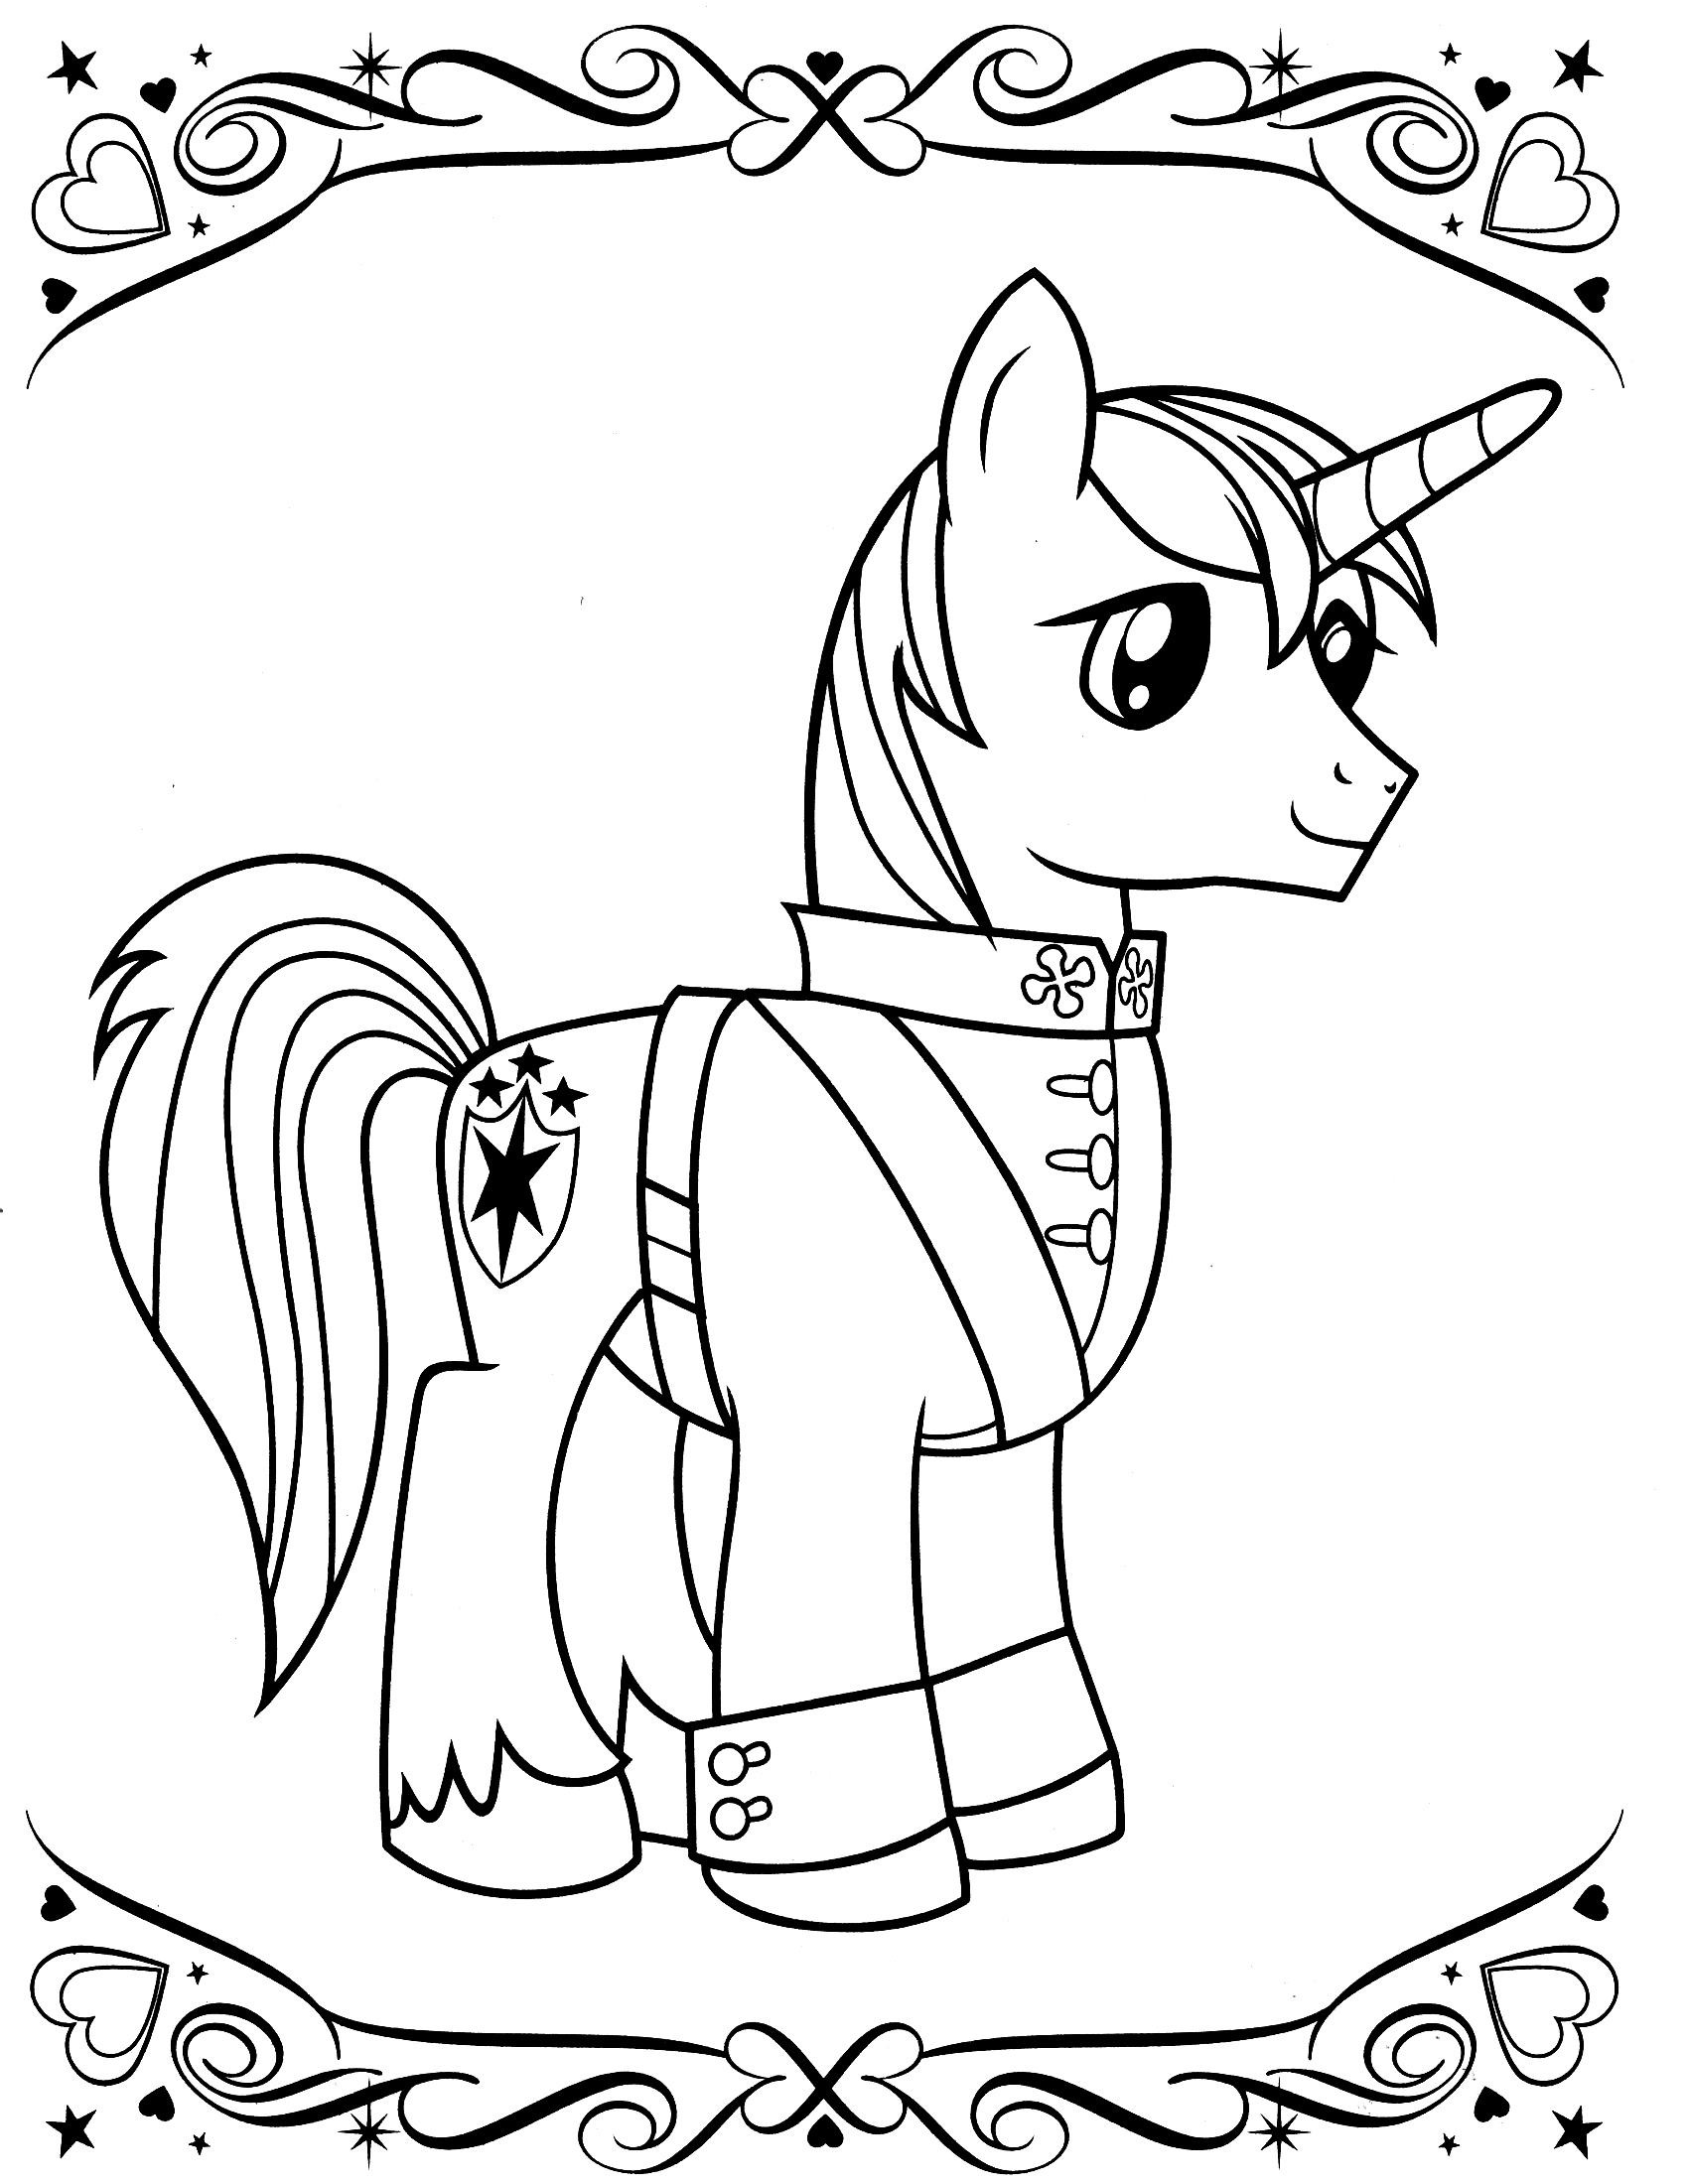 mlp coloring page